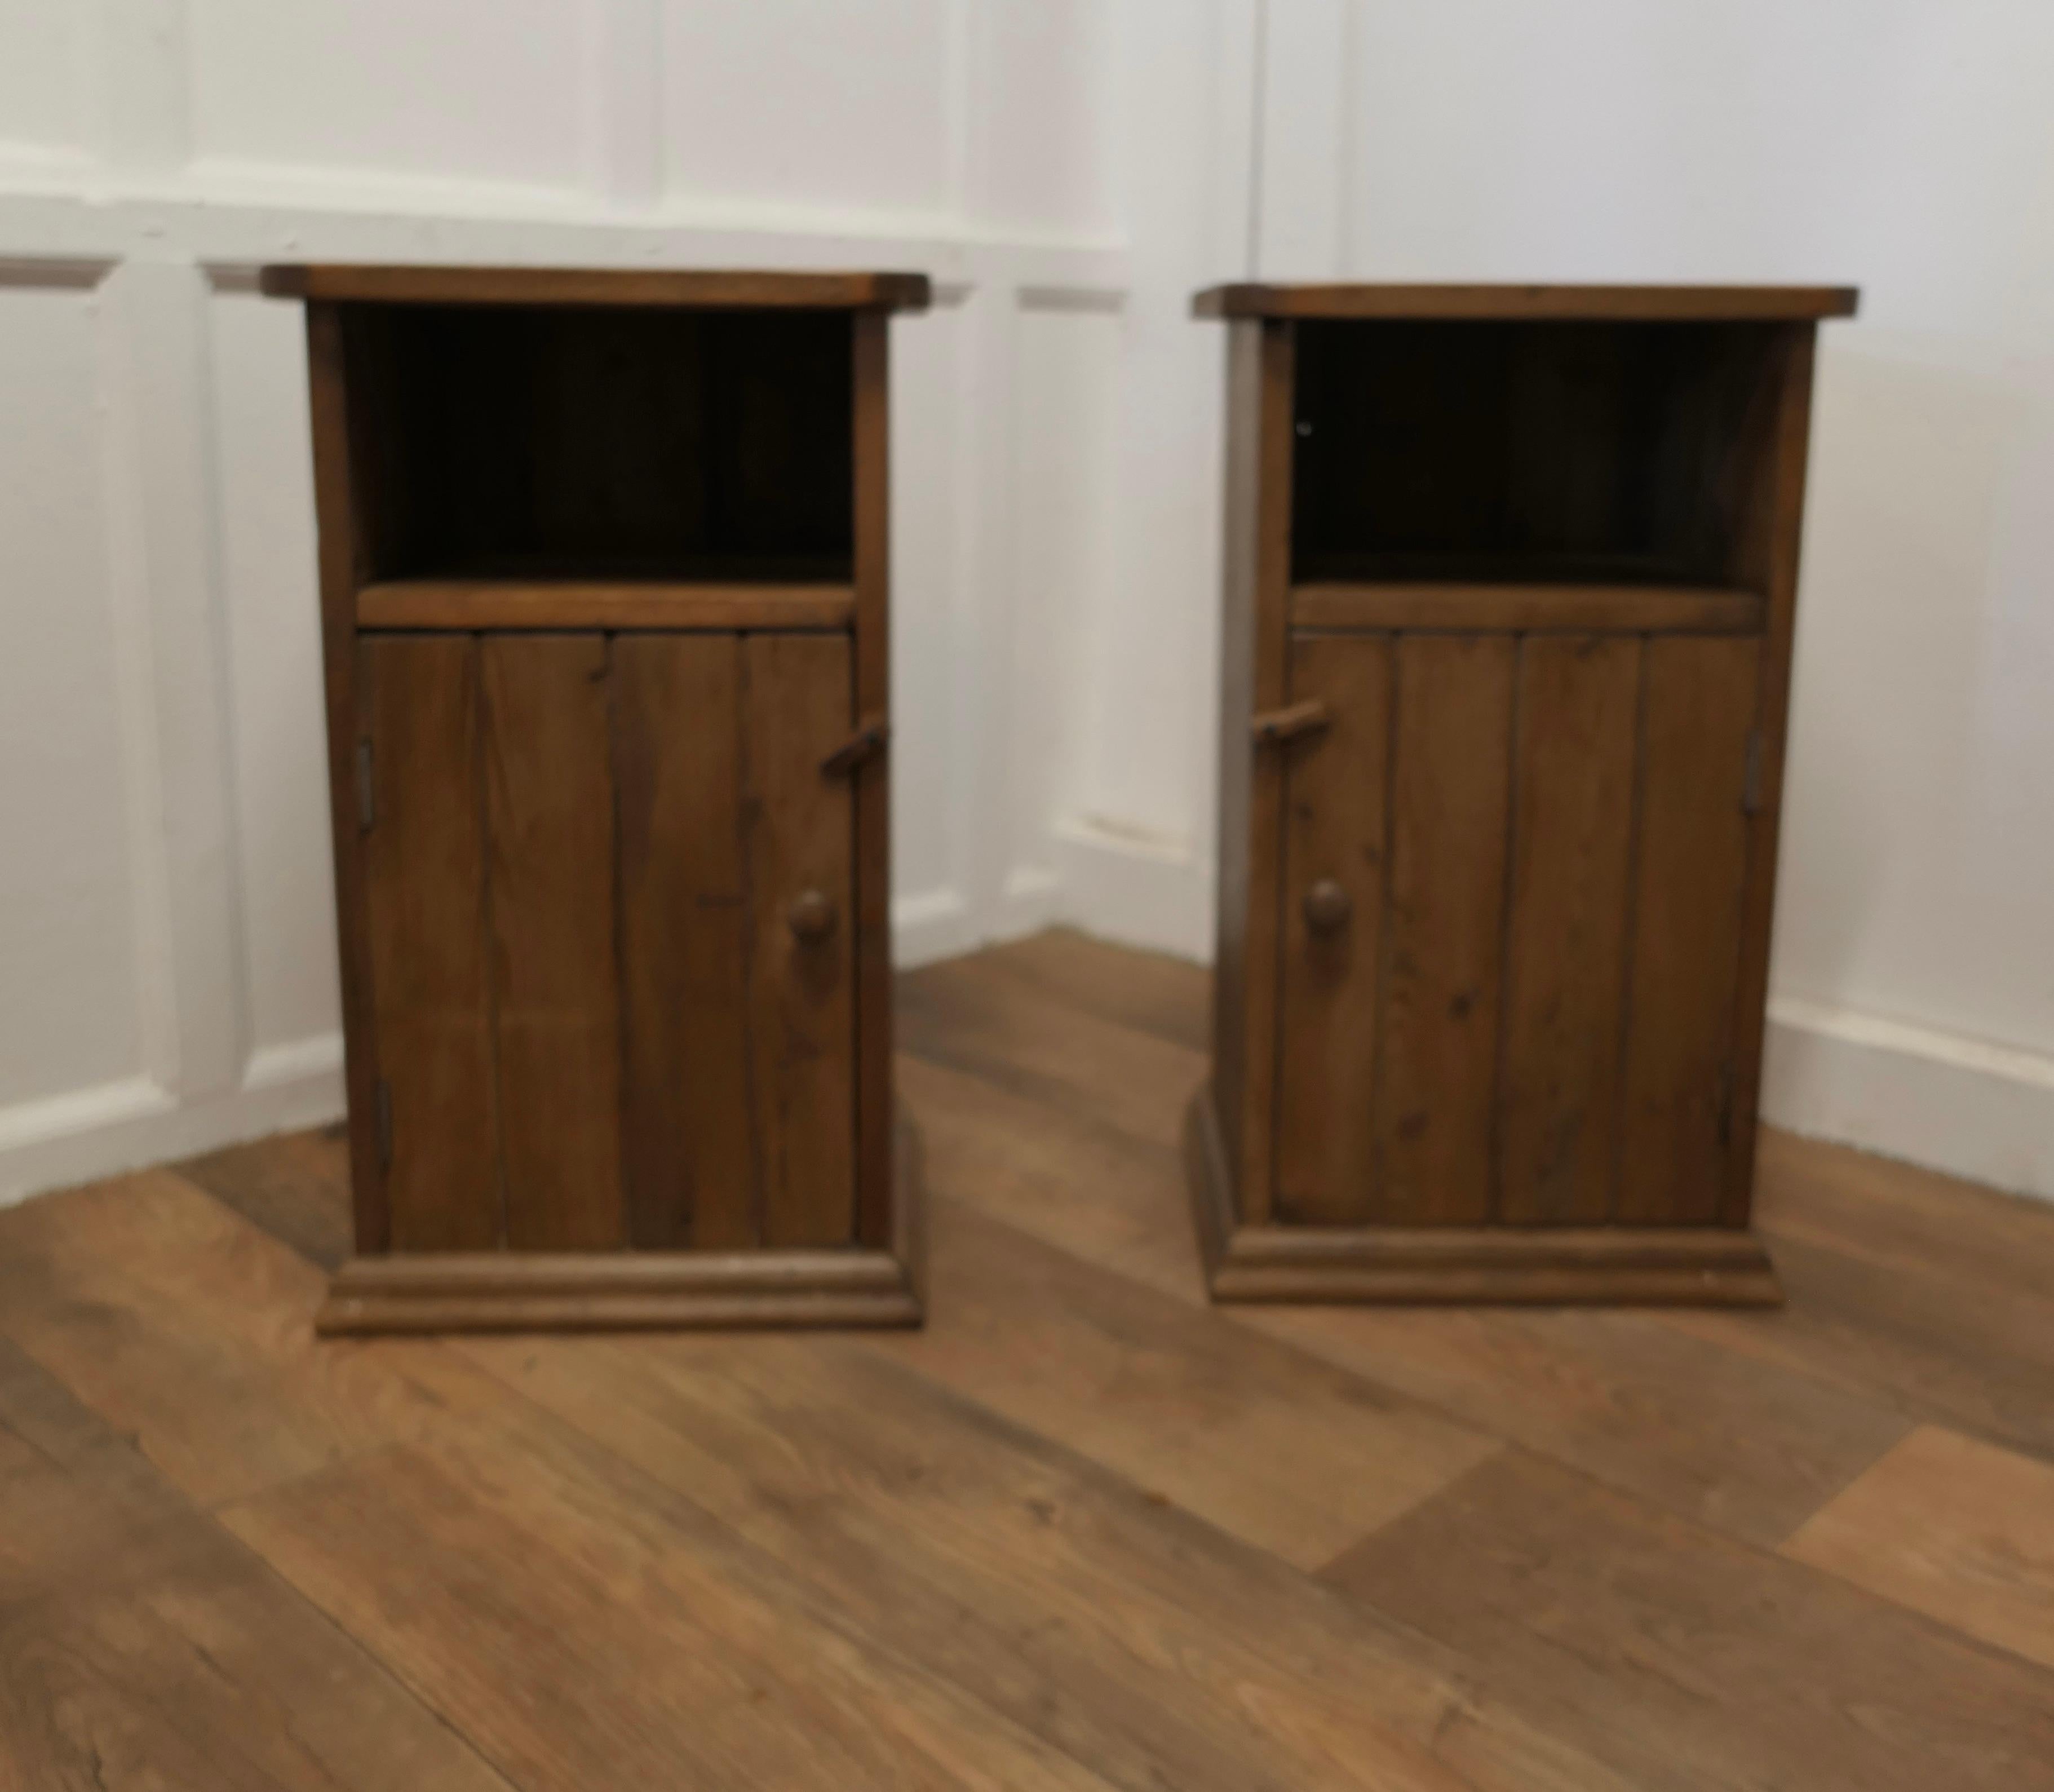 A Pair of Rustic Pine Bedside Cupboards, Night Tables

These attractive rustic pieces are made in pine, they have planked doors with a storage space over and they are shelved inside,  
The Night Tables are good and sturdy they are 27” tall, 16” wide